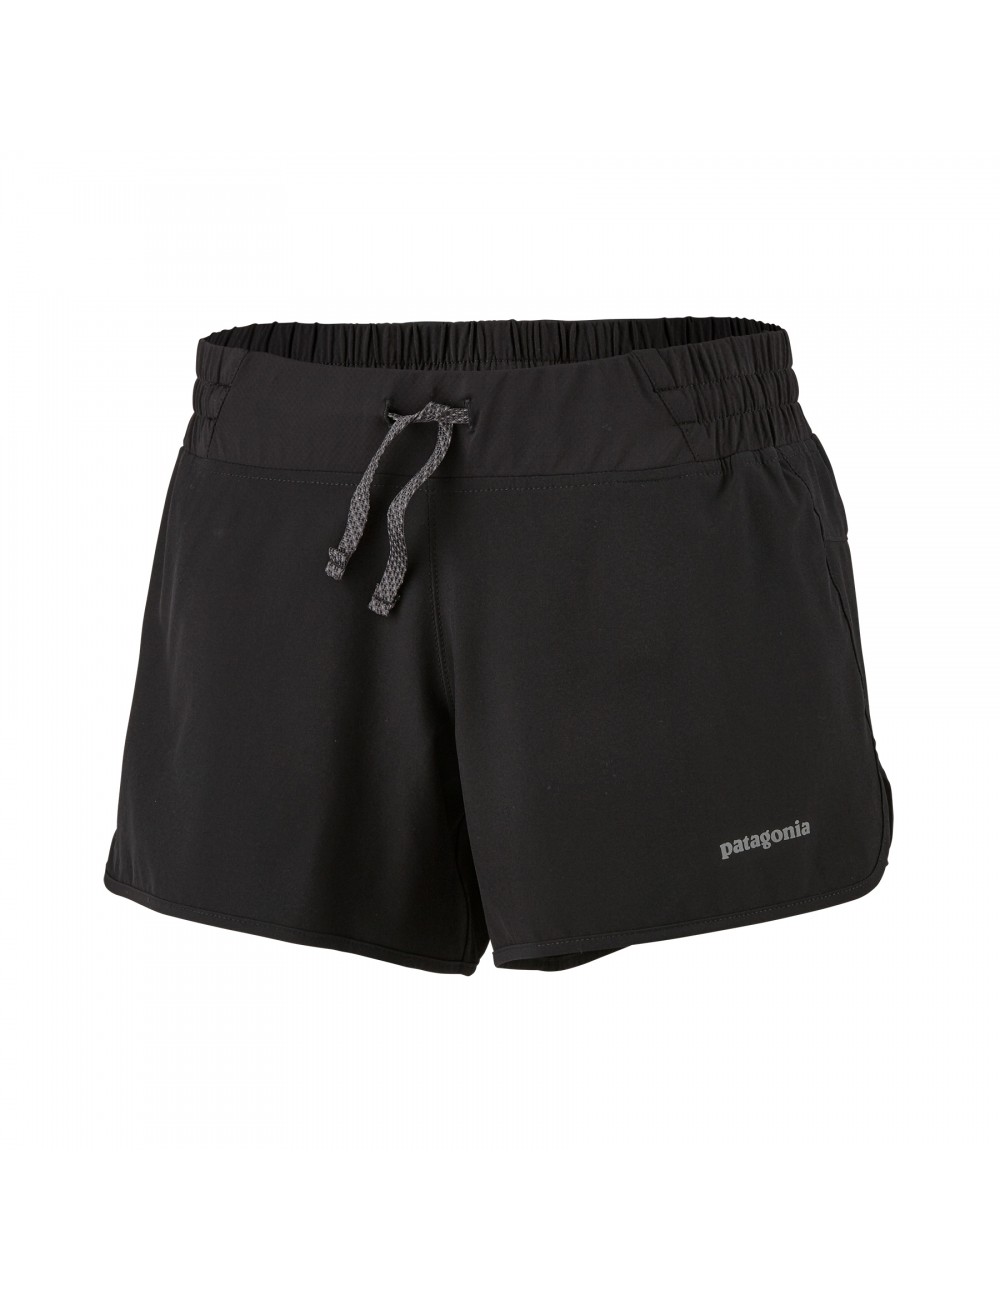 Patagonia Wms Nine Trails Shorts 4 in. - black